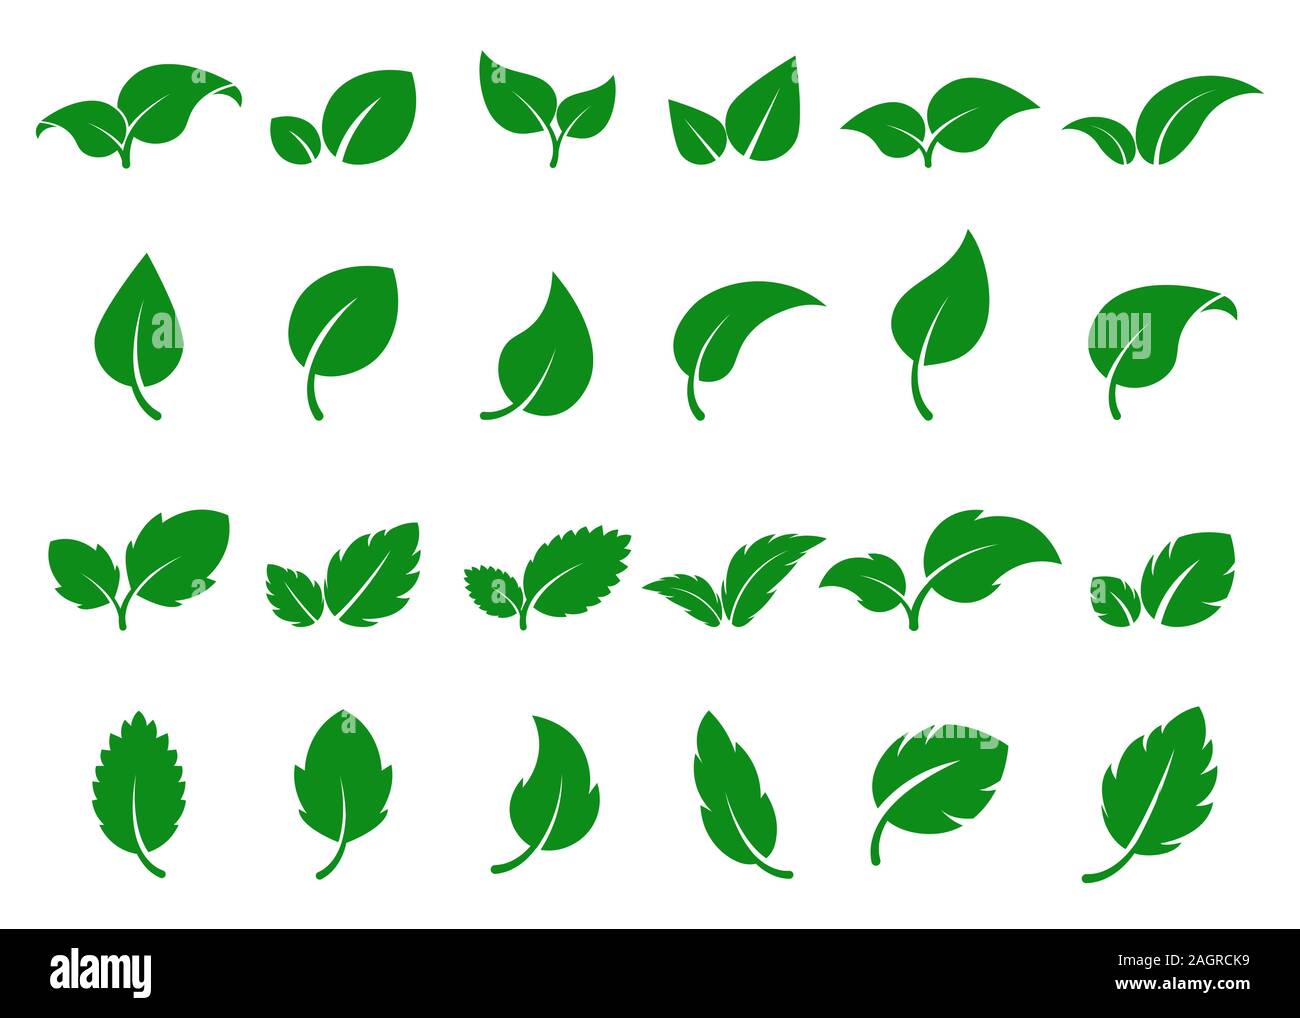 Green leaves logo. Leaf icon set. Herbal eco abstract label. Bio, vegan or pharmacy concept. Simple flat foliage design. Decorative nature silhouette. Stock Vector